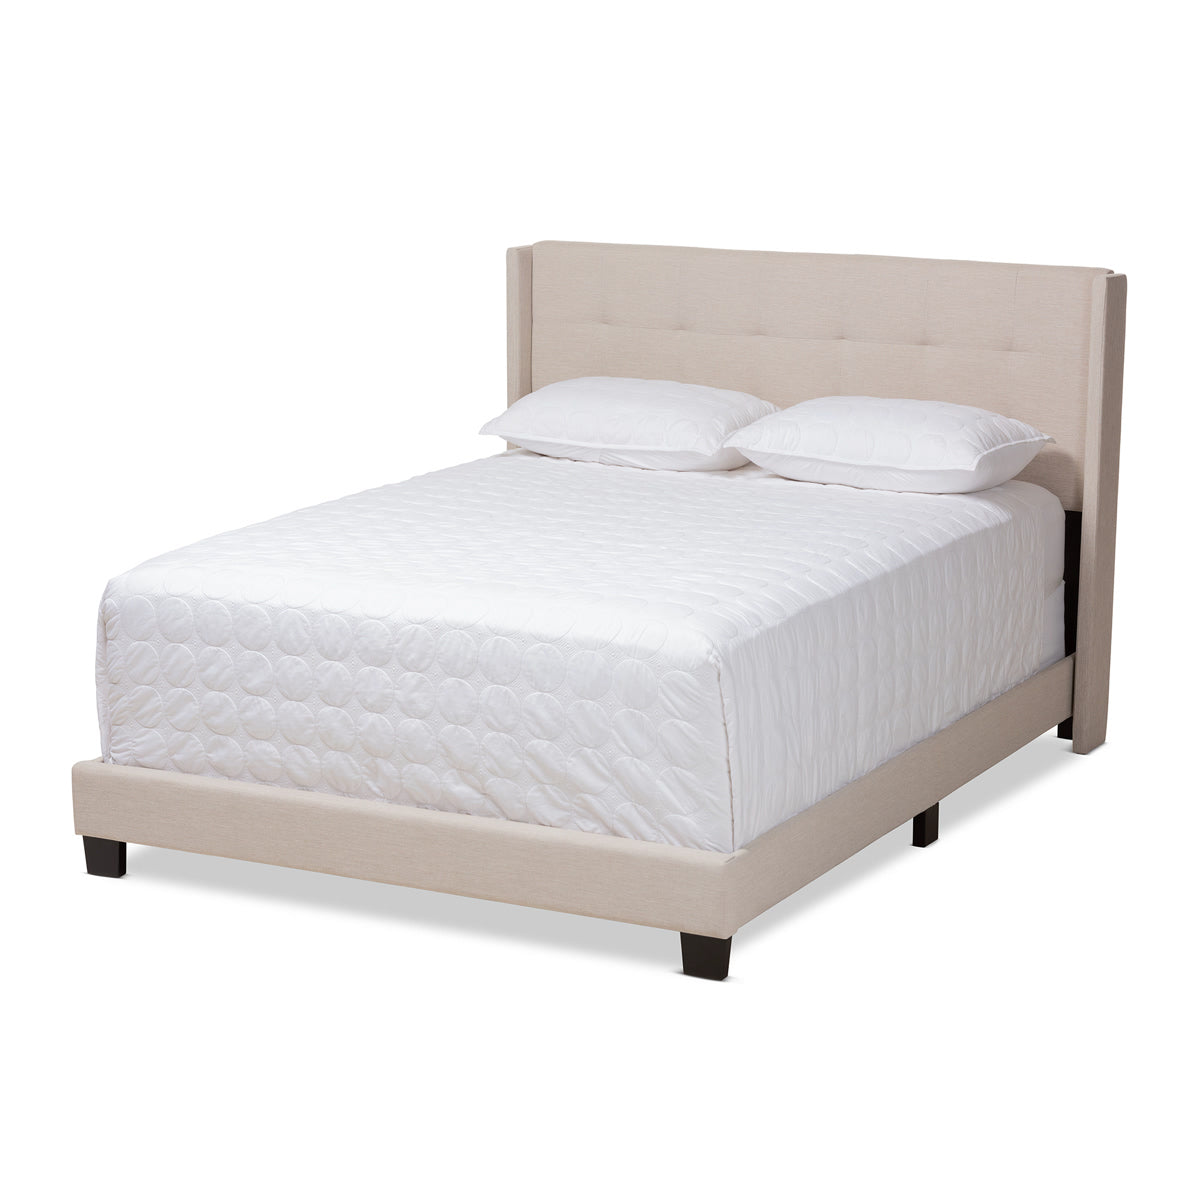 Baxton Studio Lisette Modern and Contemporary Beige Fabric Upholstered Queen Size Bed Baxton Studio-0-Minimal And Modern - 1